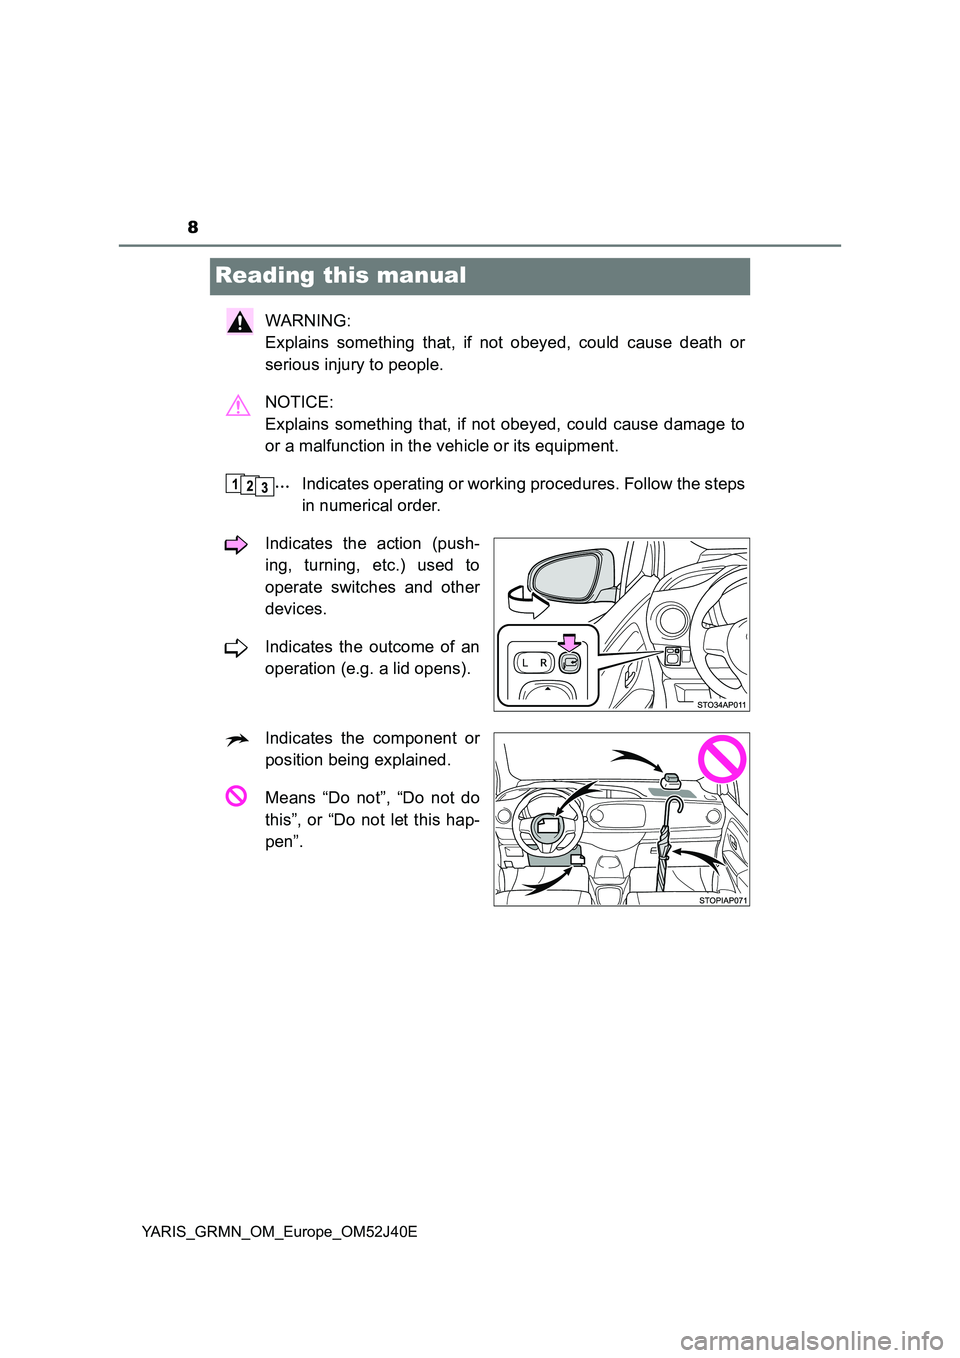 TOYOTA YARIS GRMN 2017  Owners Manual 8
YARIS_GRMN_OM_Europe_OM52J40E
Reading this manual
WARNING:  
Explains something that, if not obeyed, could cause death or 
serious injury to people. 
NOTICE:  
Explains something that, if not obeyed